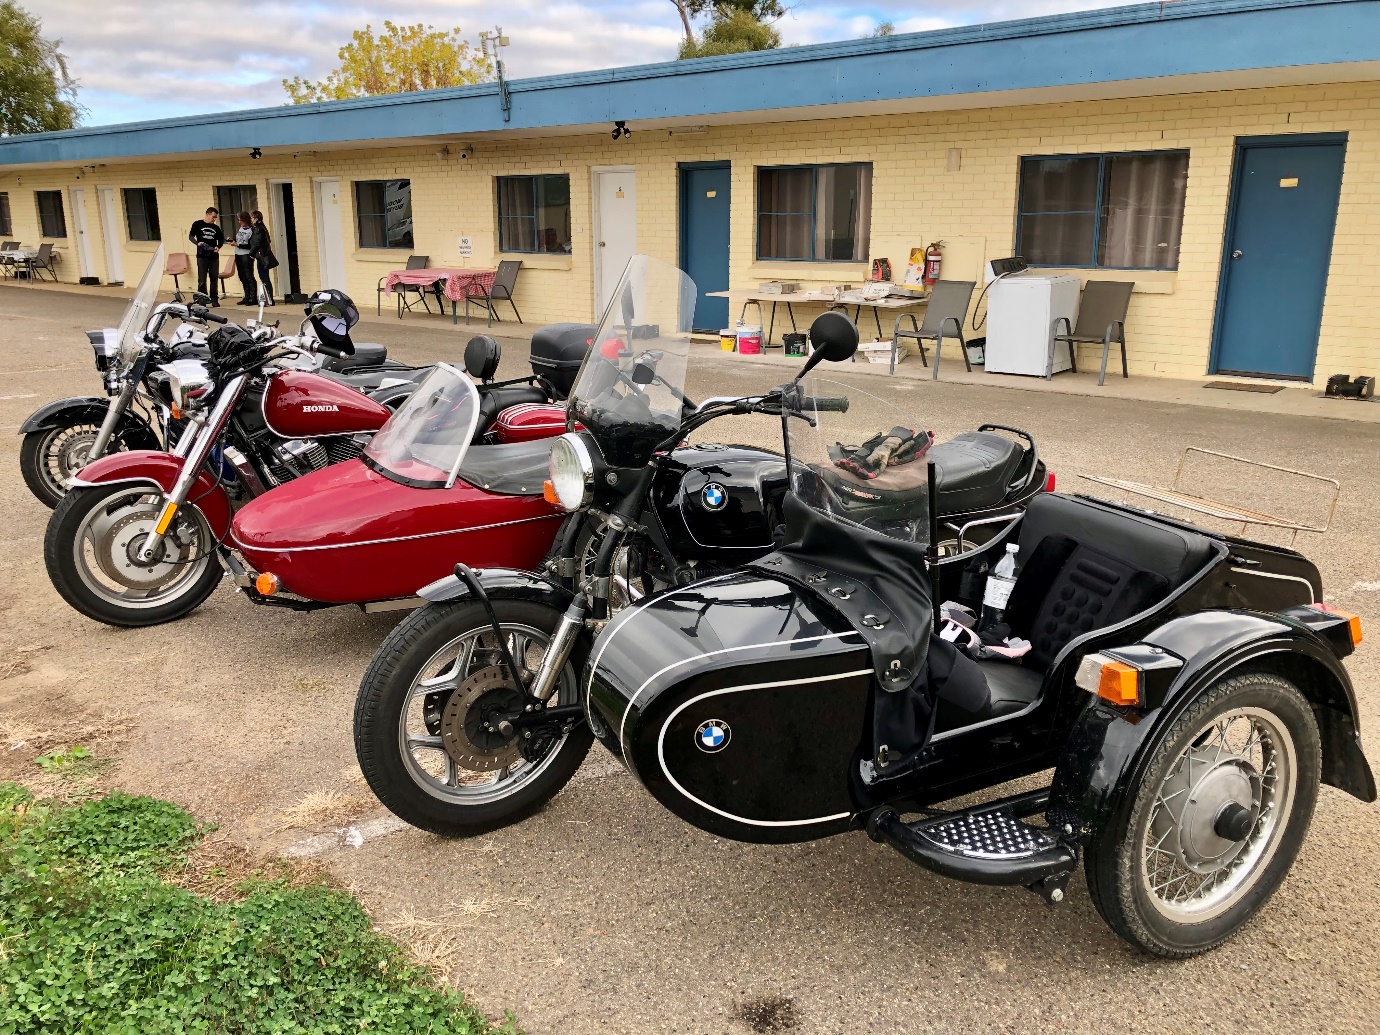 Motorcycles parked in front of a building

Description automatically generated with medium confidence